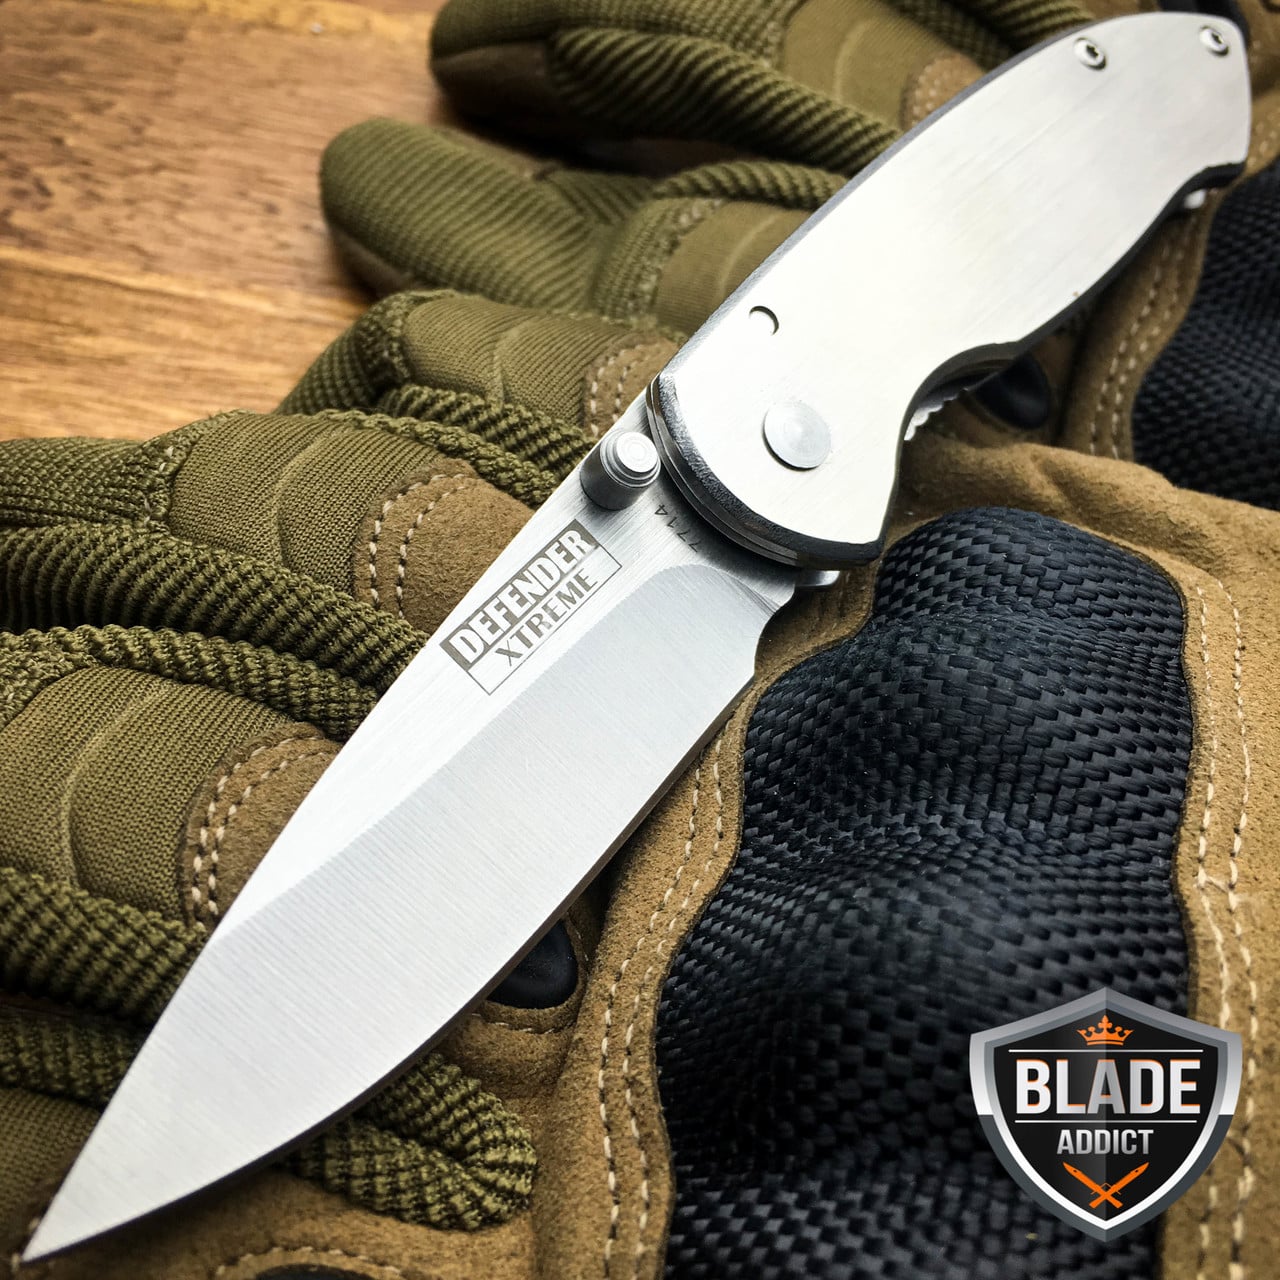 6.5″ FULL STAINLESS STEEL TACTICAL COMBAT SPRING ASSISTED OPEN POCKET KNIFE EDC